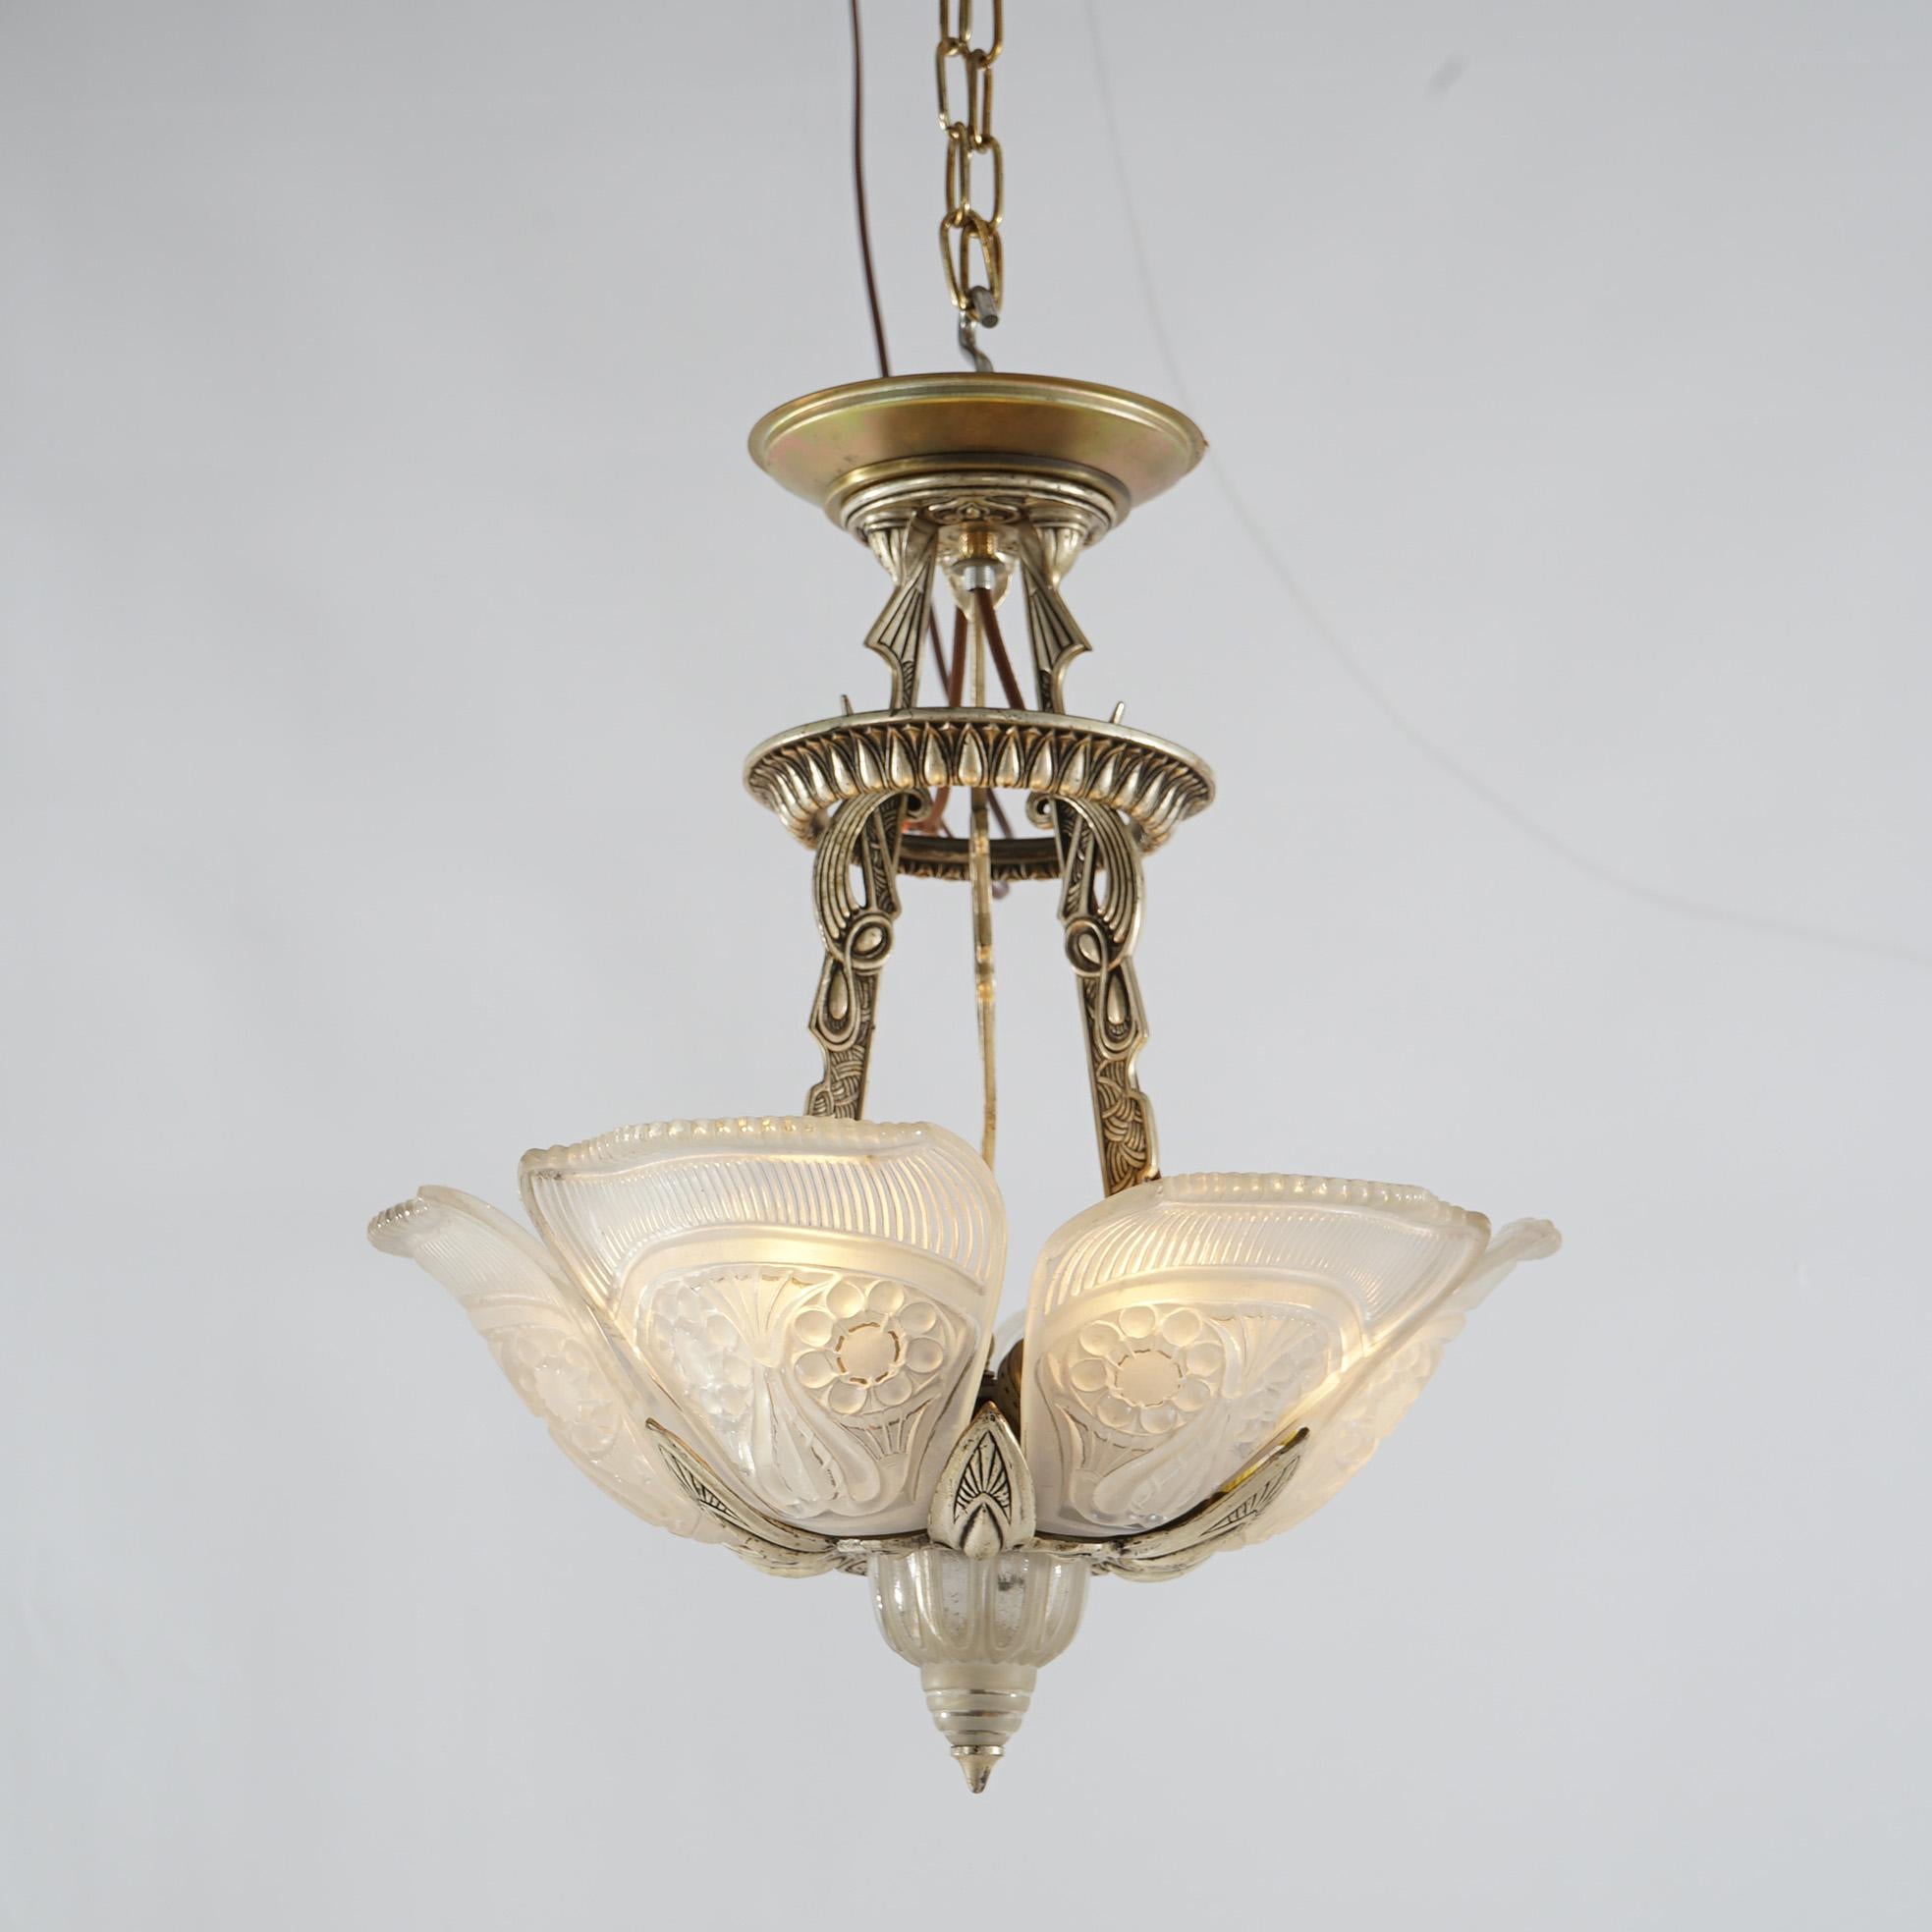 Antique Art Deco Slip Shade Hanging Light with Opalescent Pressed Glass Shades 2